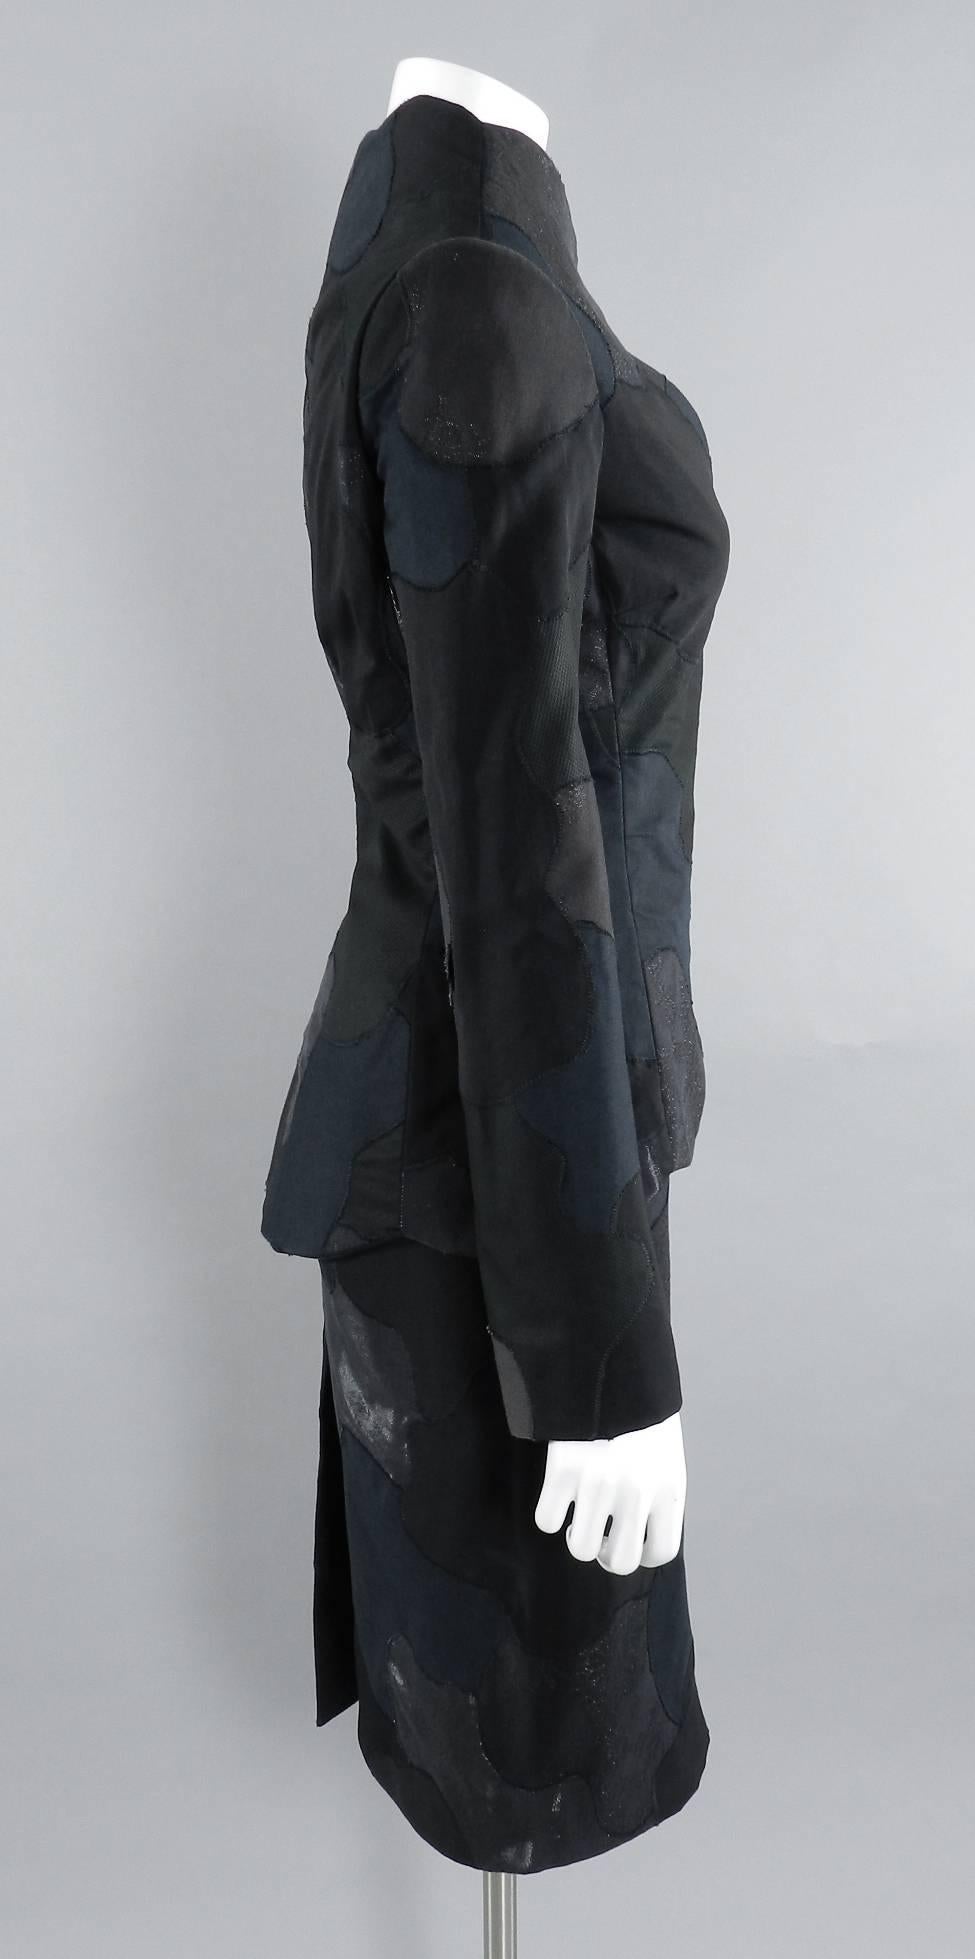 Alexander McQueen black patchwork design skirt suit. Stand away collar, snaps at front, slim pencil skirt. Interior of jacket neckline is faced with silk satin. Jacket and skirt are tagged IT 42 (USA 6) - skirt hip runs all at 35 - 35.5